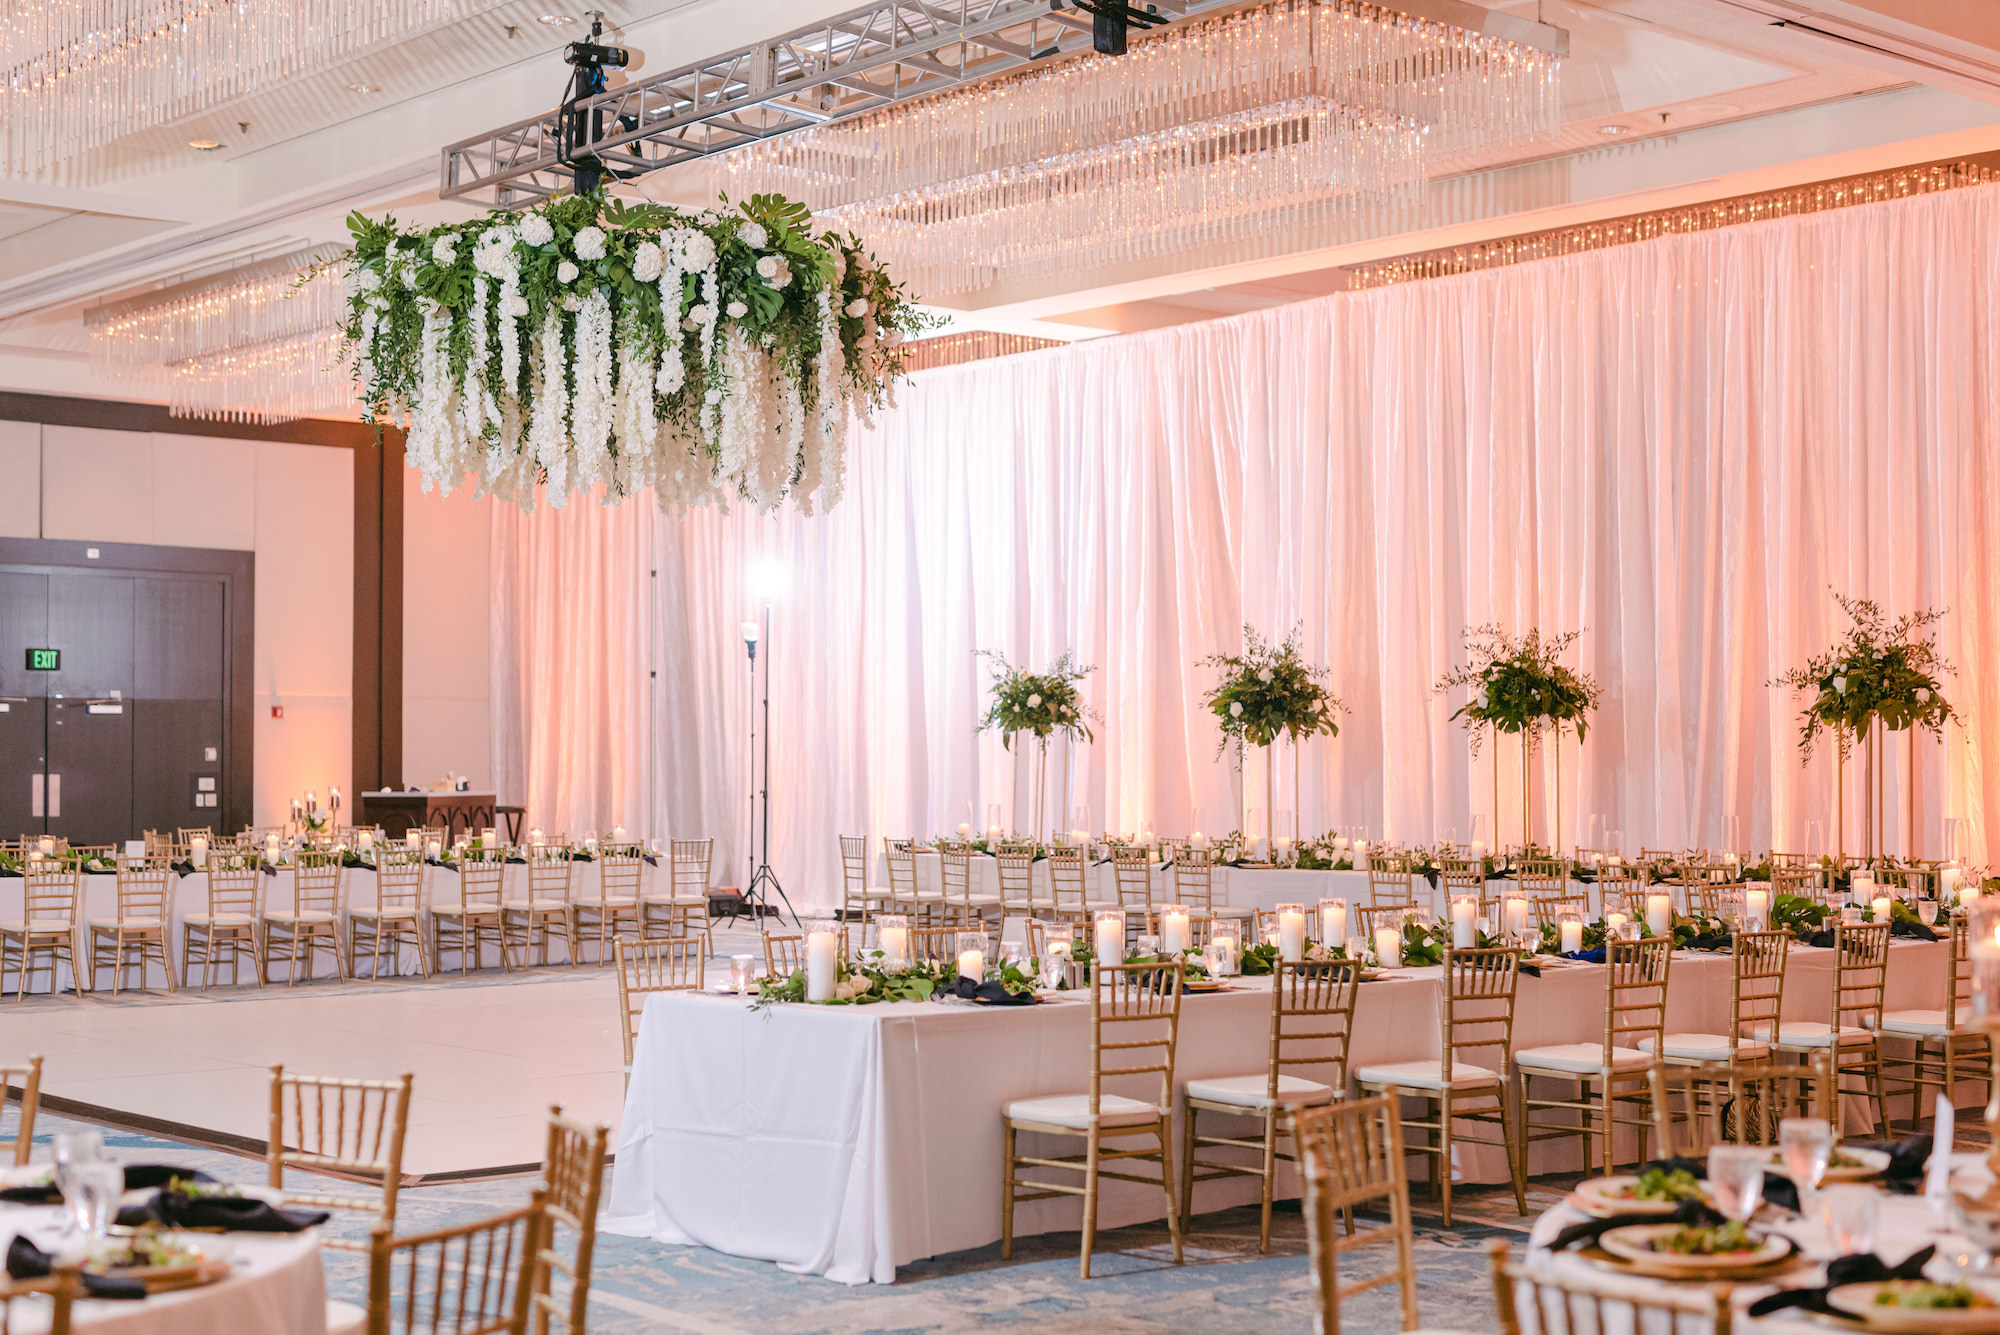 Hanging Floral Chandelier with White Draped Ballroom | Elegant Wedding Reception Decor Ideas | Tampa Wedding Florist FH Events | Venue Hilton Tampa Downtown